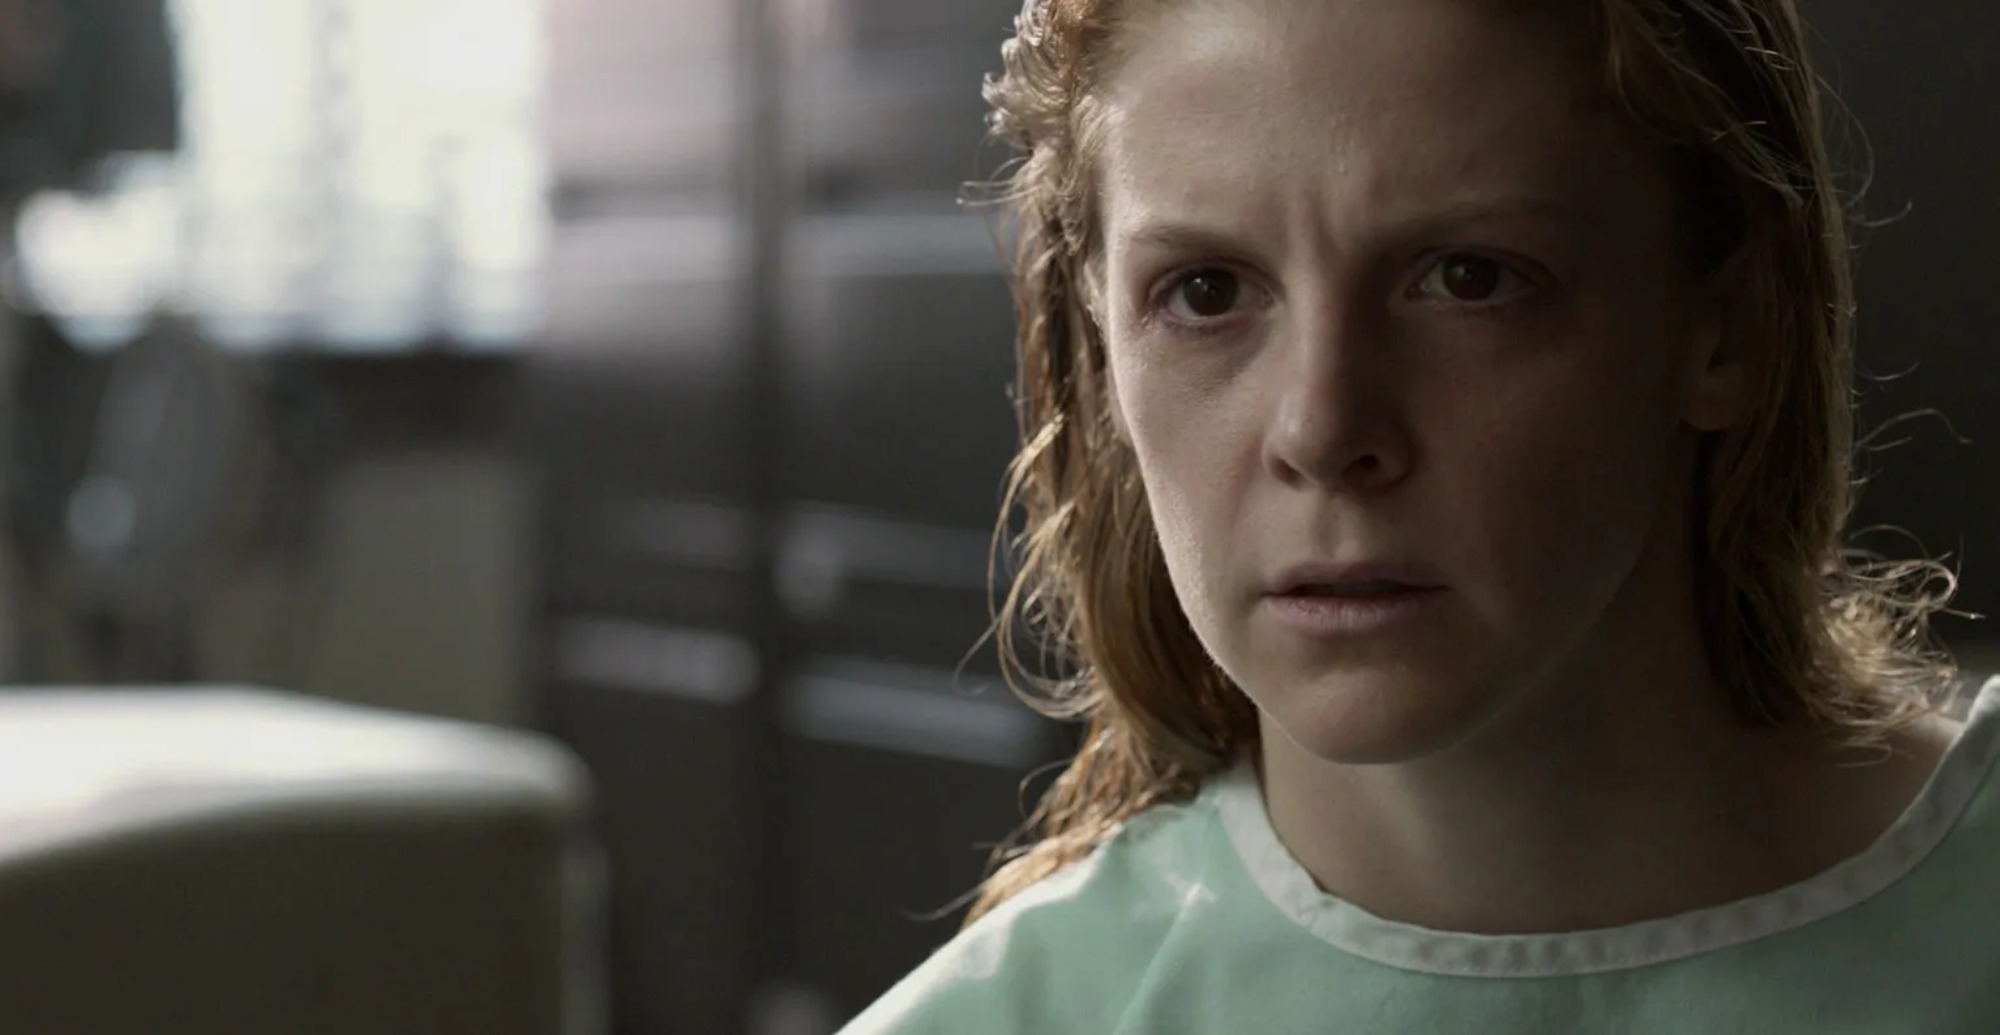 Damien Chazelle horror movie 'The Last Exorcism II' Ashley Bell as Nell looking surprised, wearing a hospital gown.